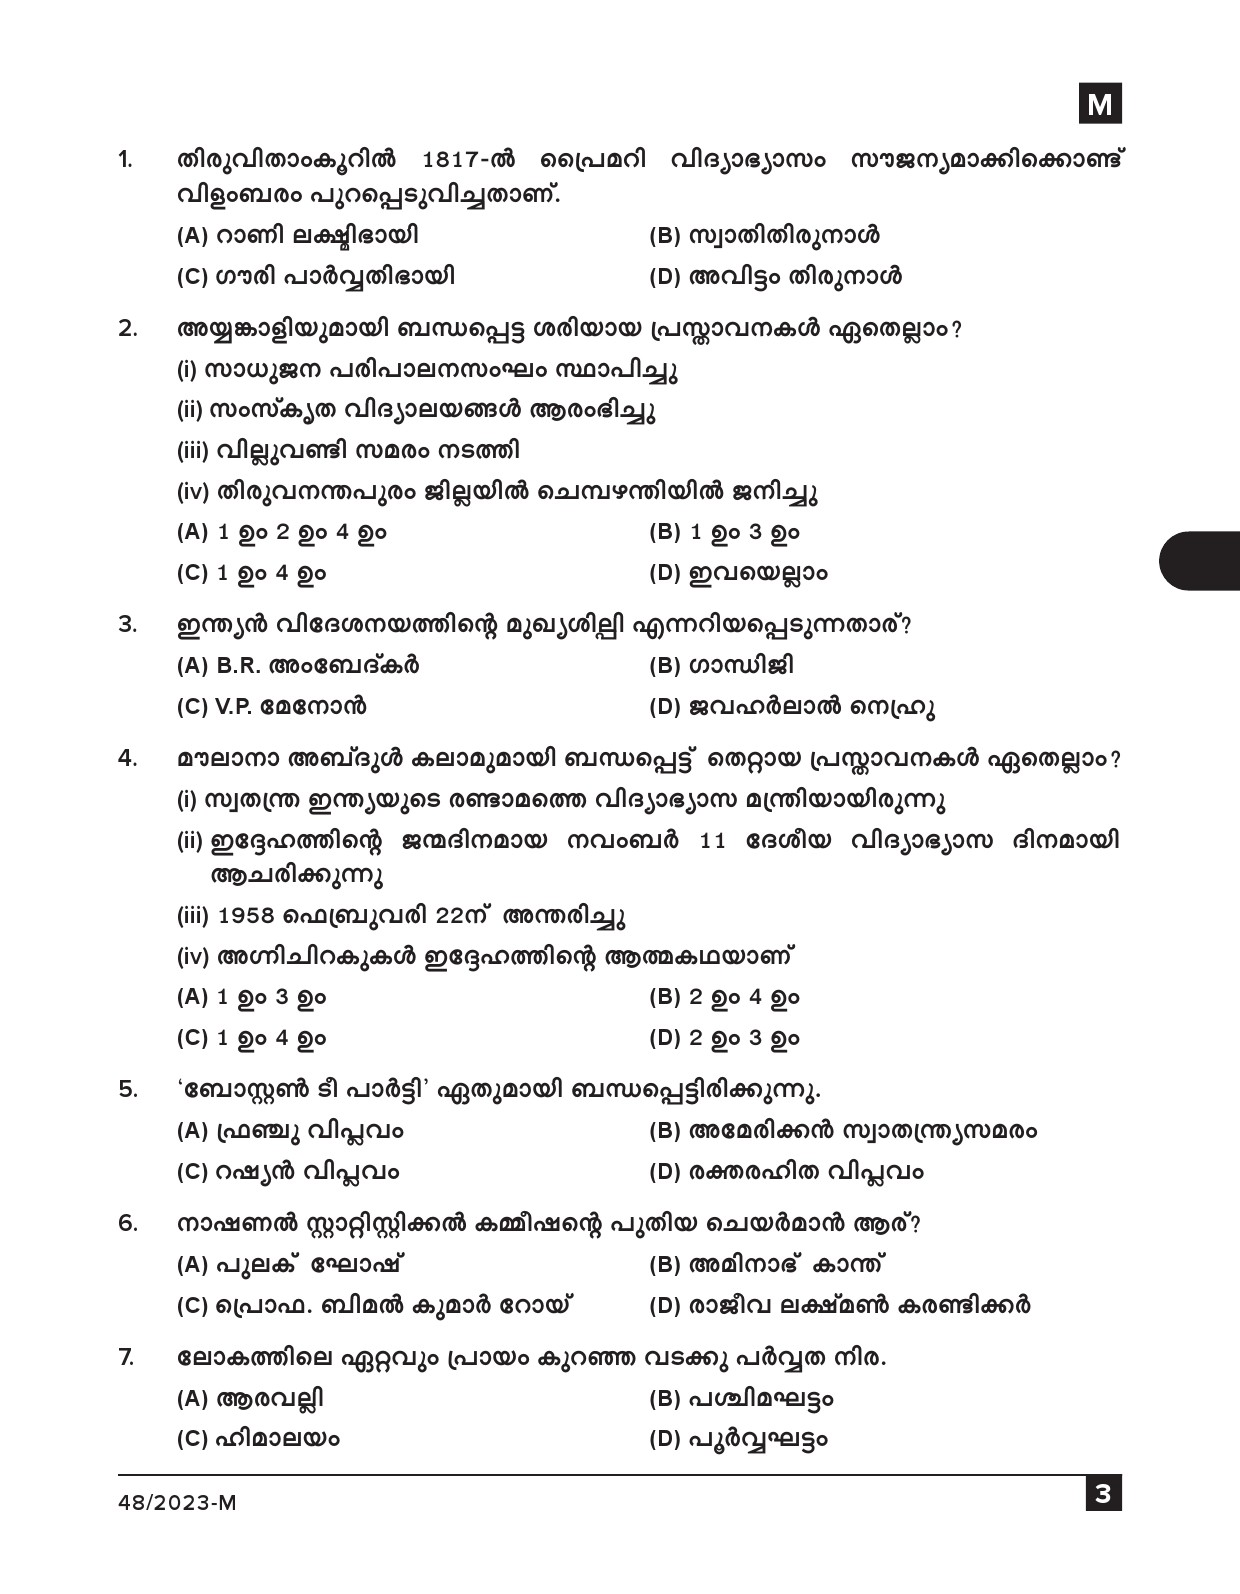 KPSC Fire and Rescue Officer Malayalam Exam 2023 Code 0482023 M 2